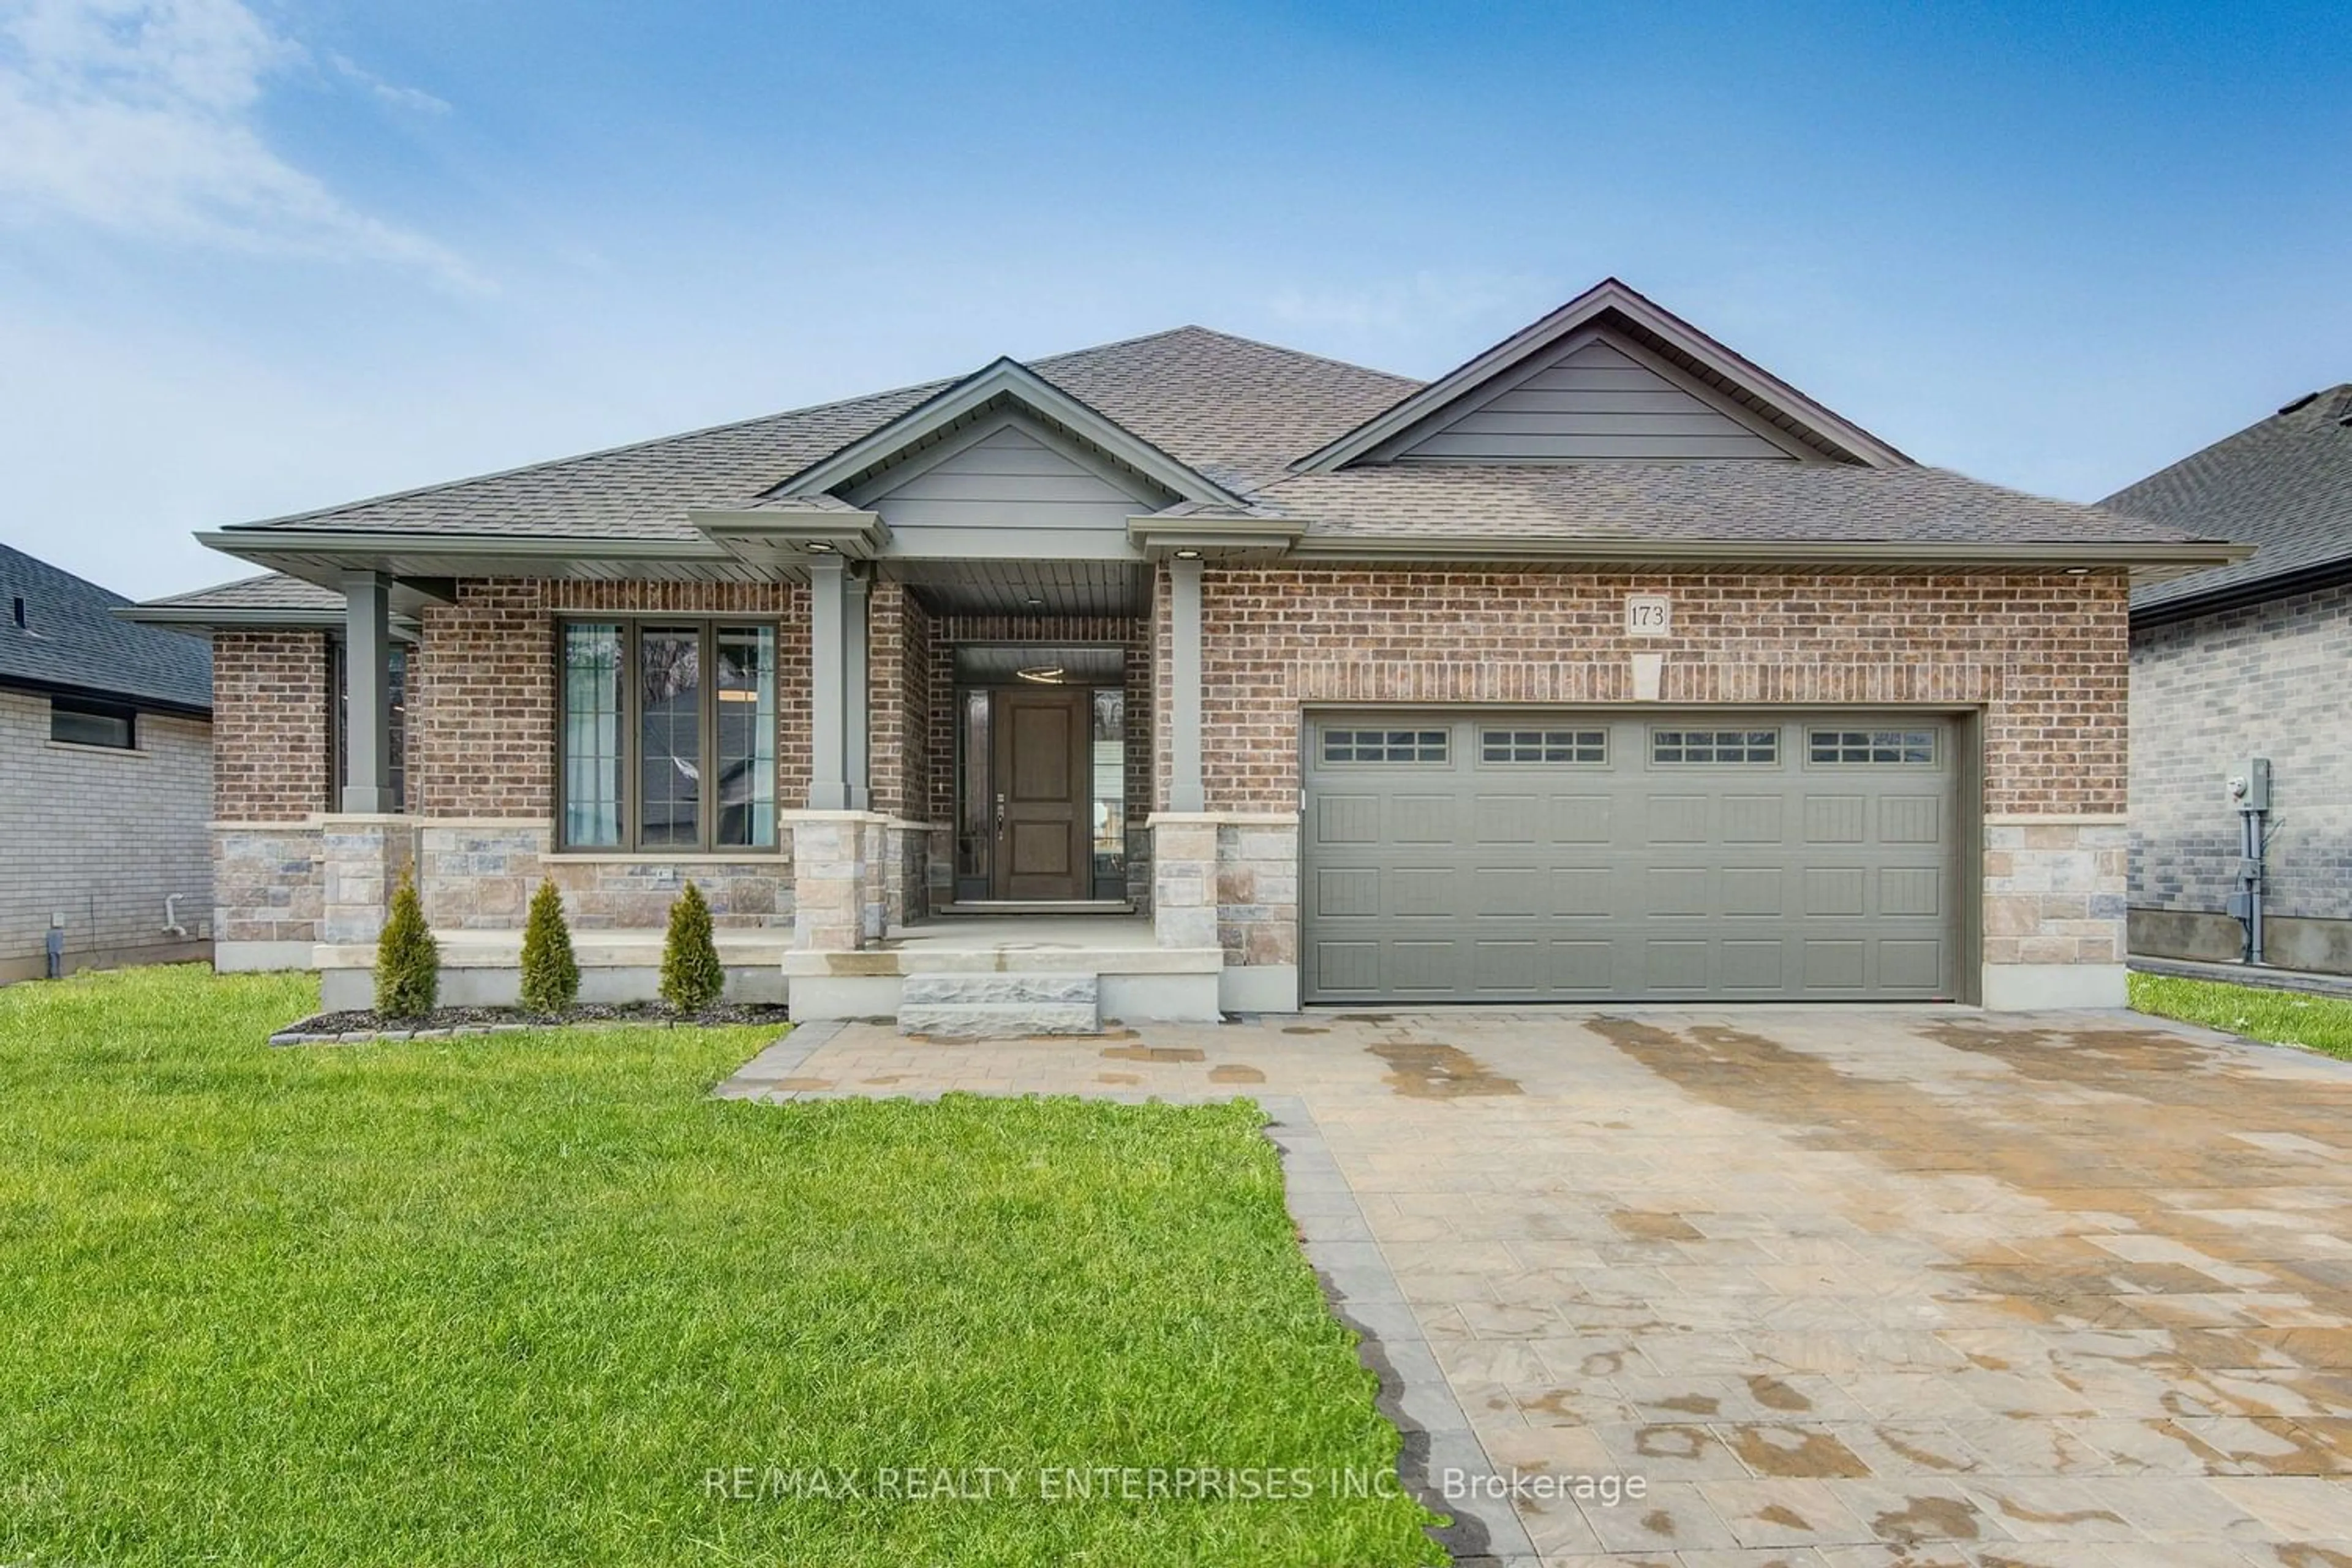 Home with brick exterior material for 173 Jennifers Tr, Thames Centre Ontario N0M 2P0